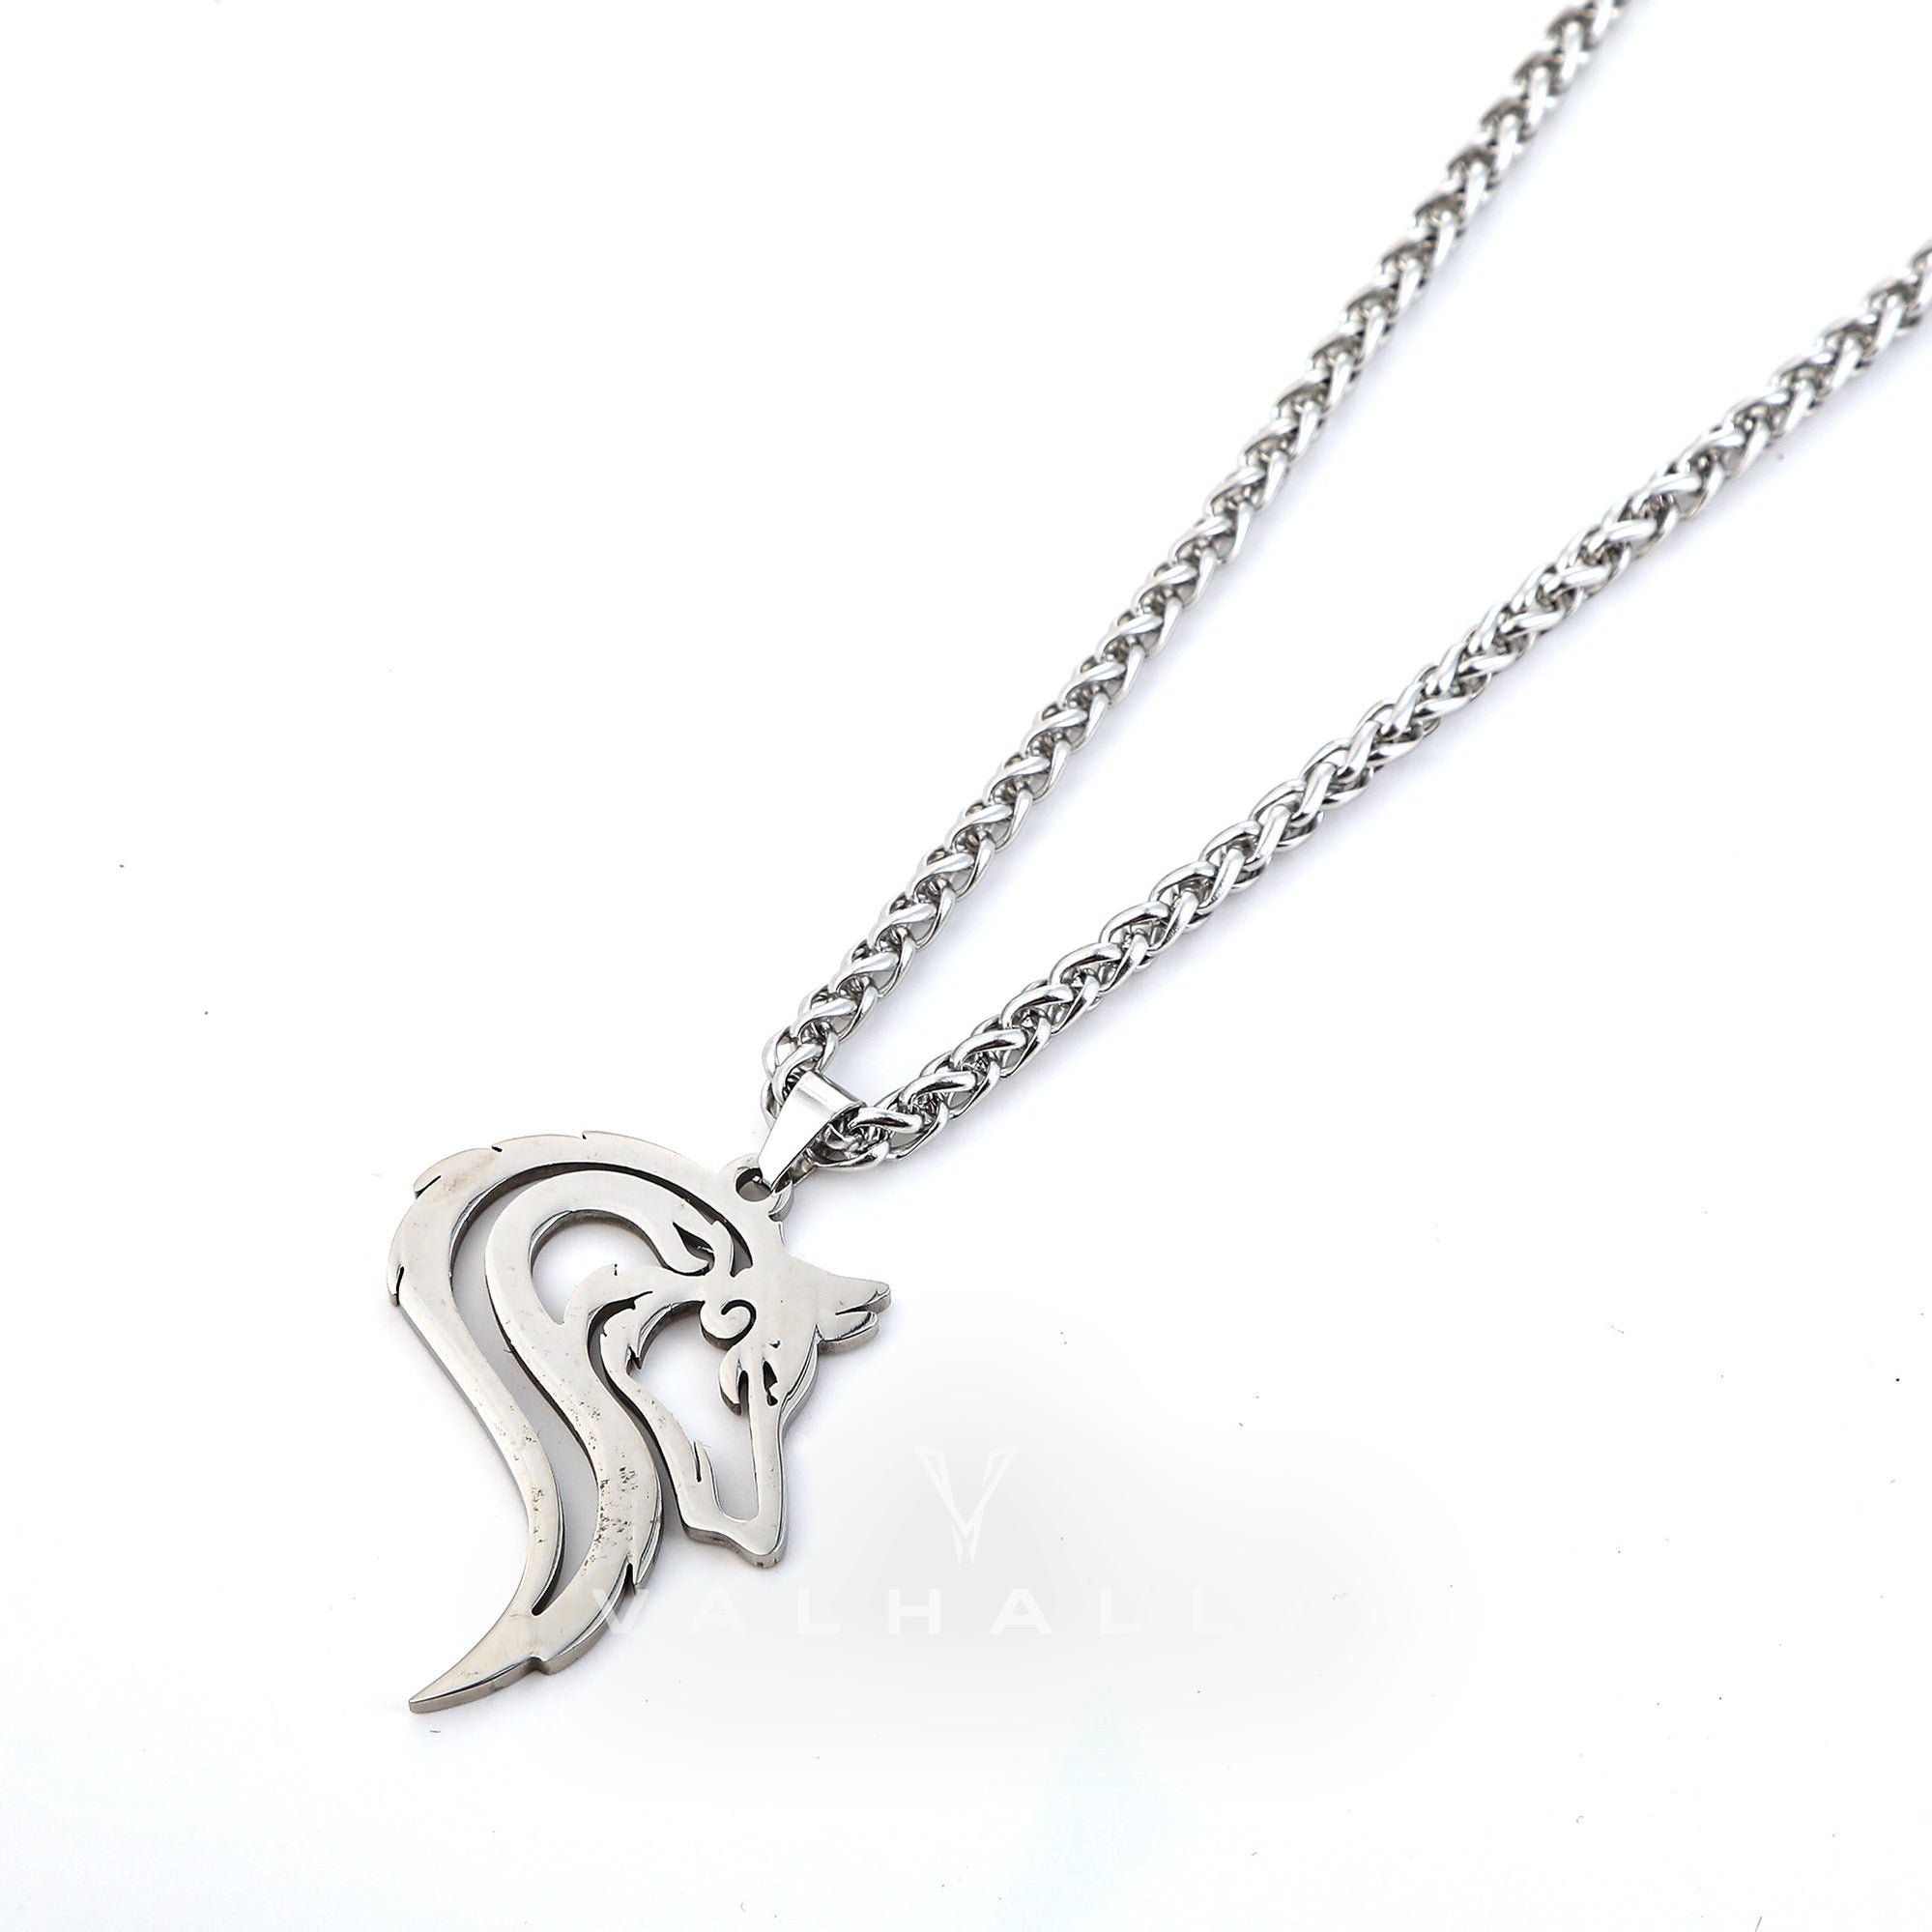 Handcrafted Stainless Steel Odin's Wolf Head Pendant & Chain